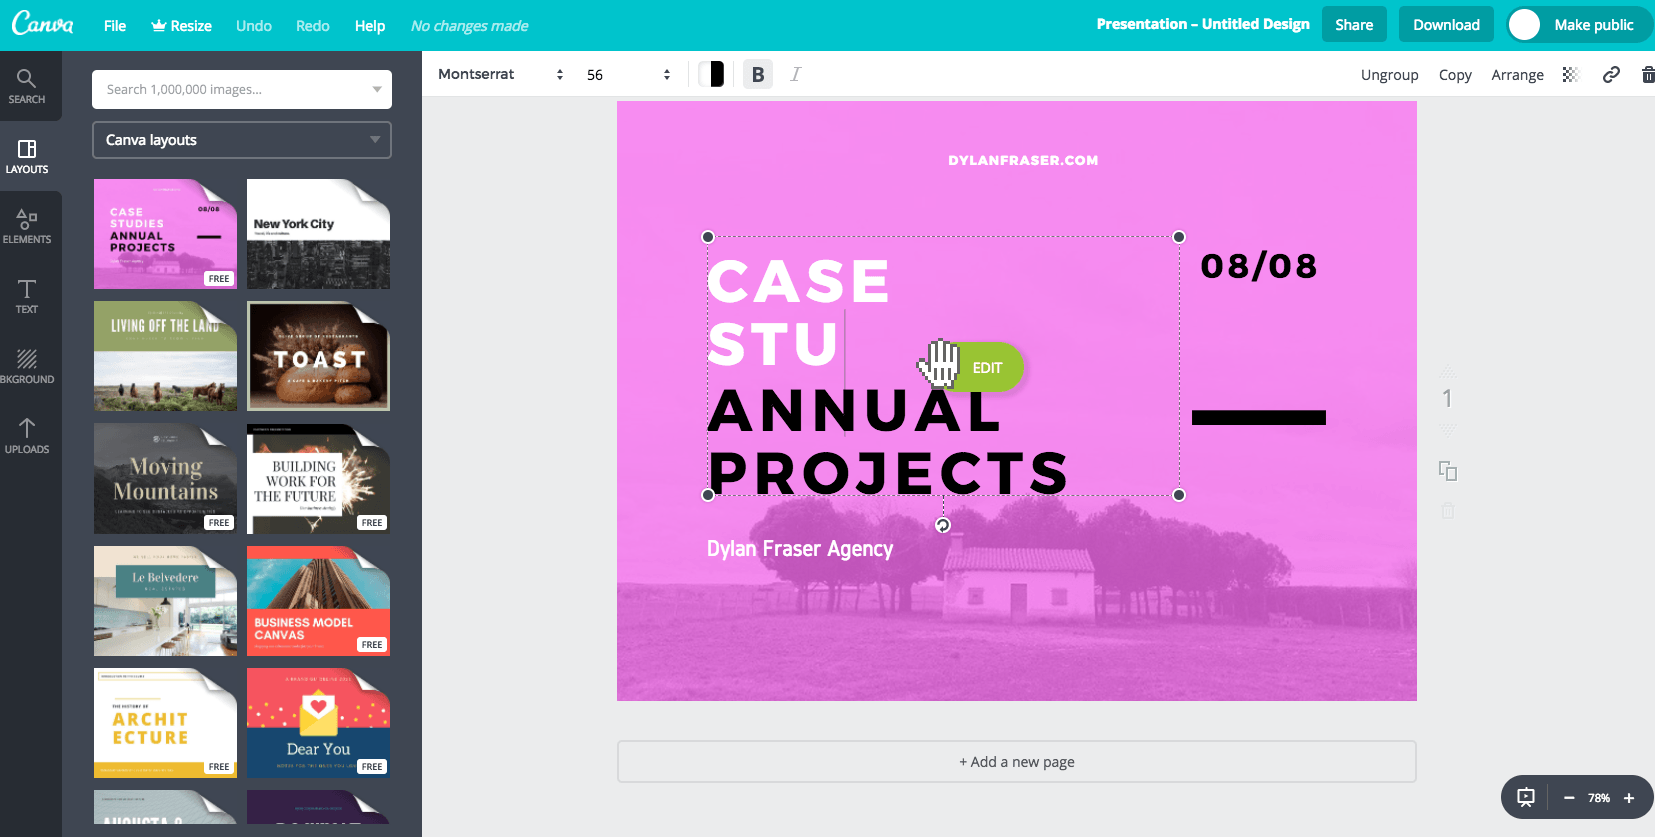 Become a Professional Designer in a Few Minutes With Canva